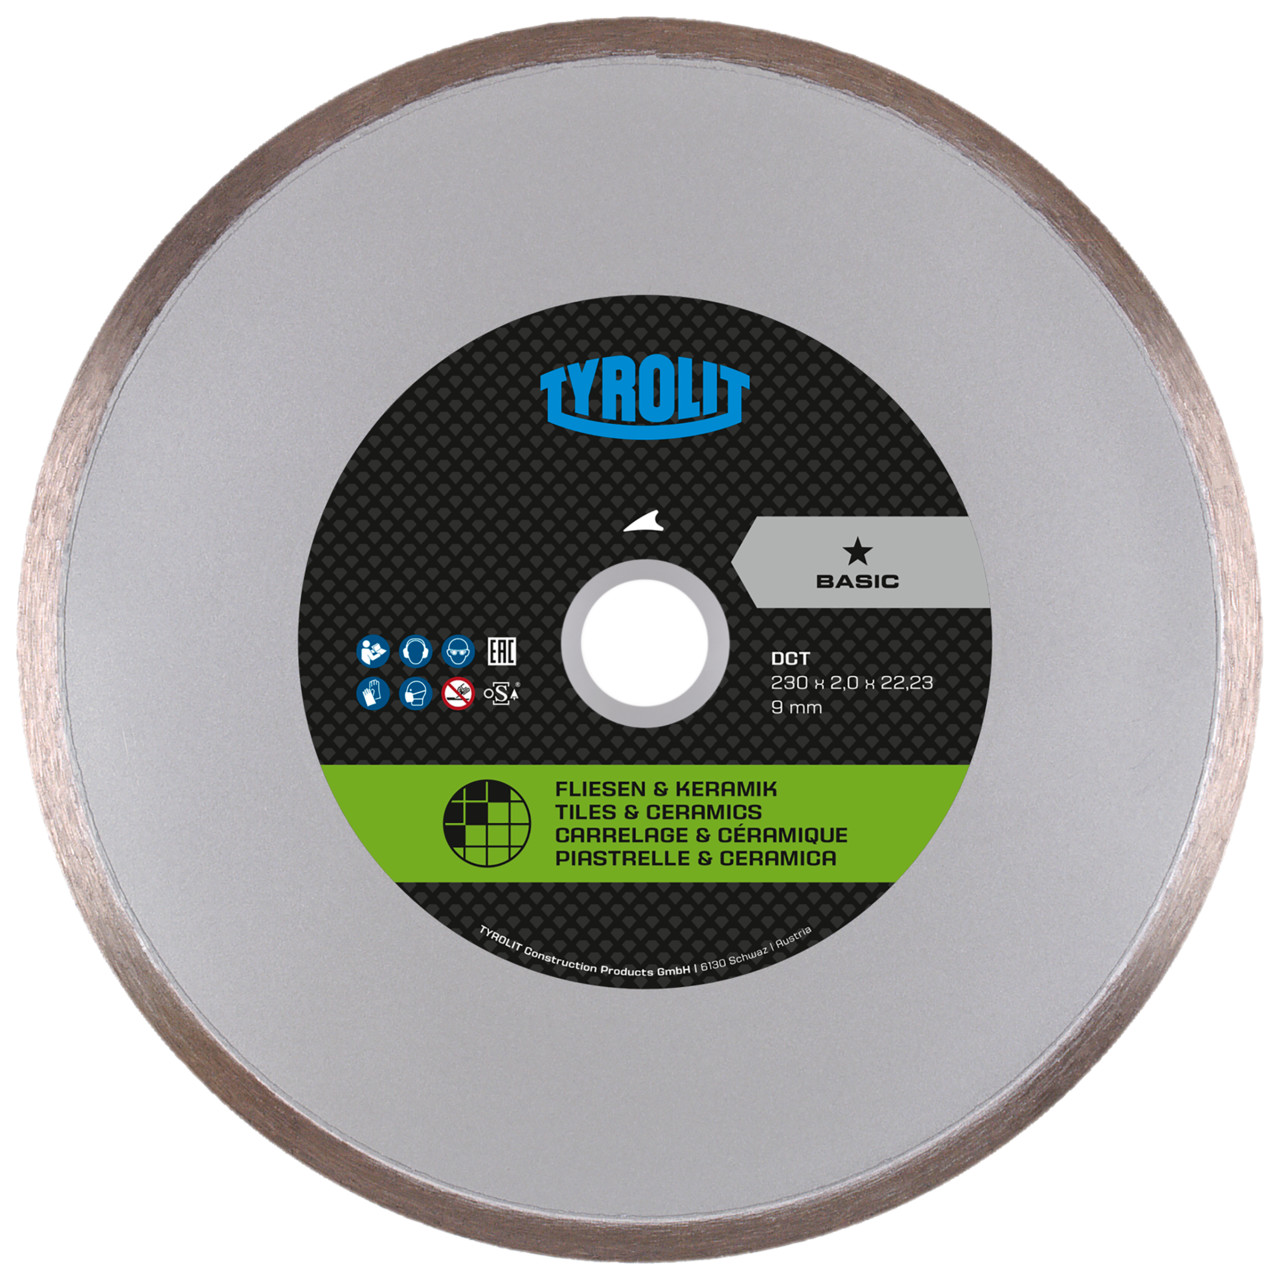 Tyrolit Dry-cutting saw blades DxDxH 230x2x22.23 DCT, shape: 1A1R (cutting disc with continuous cutting wheel), Art. 475986